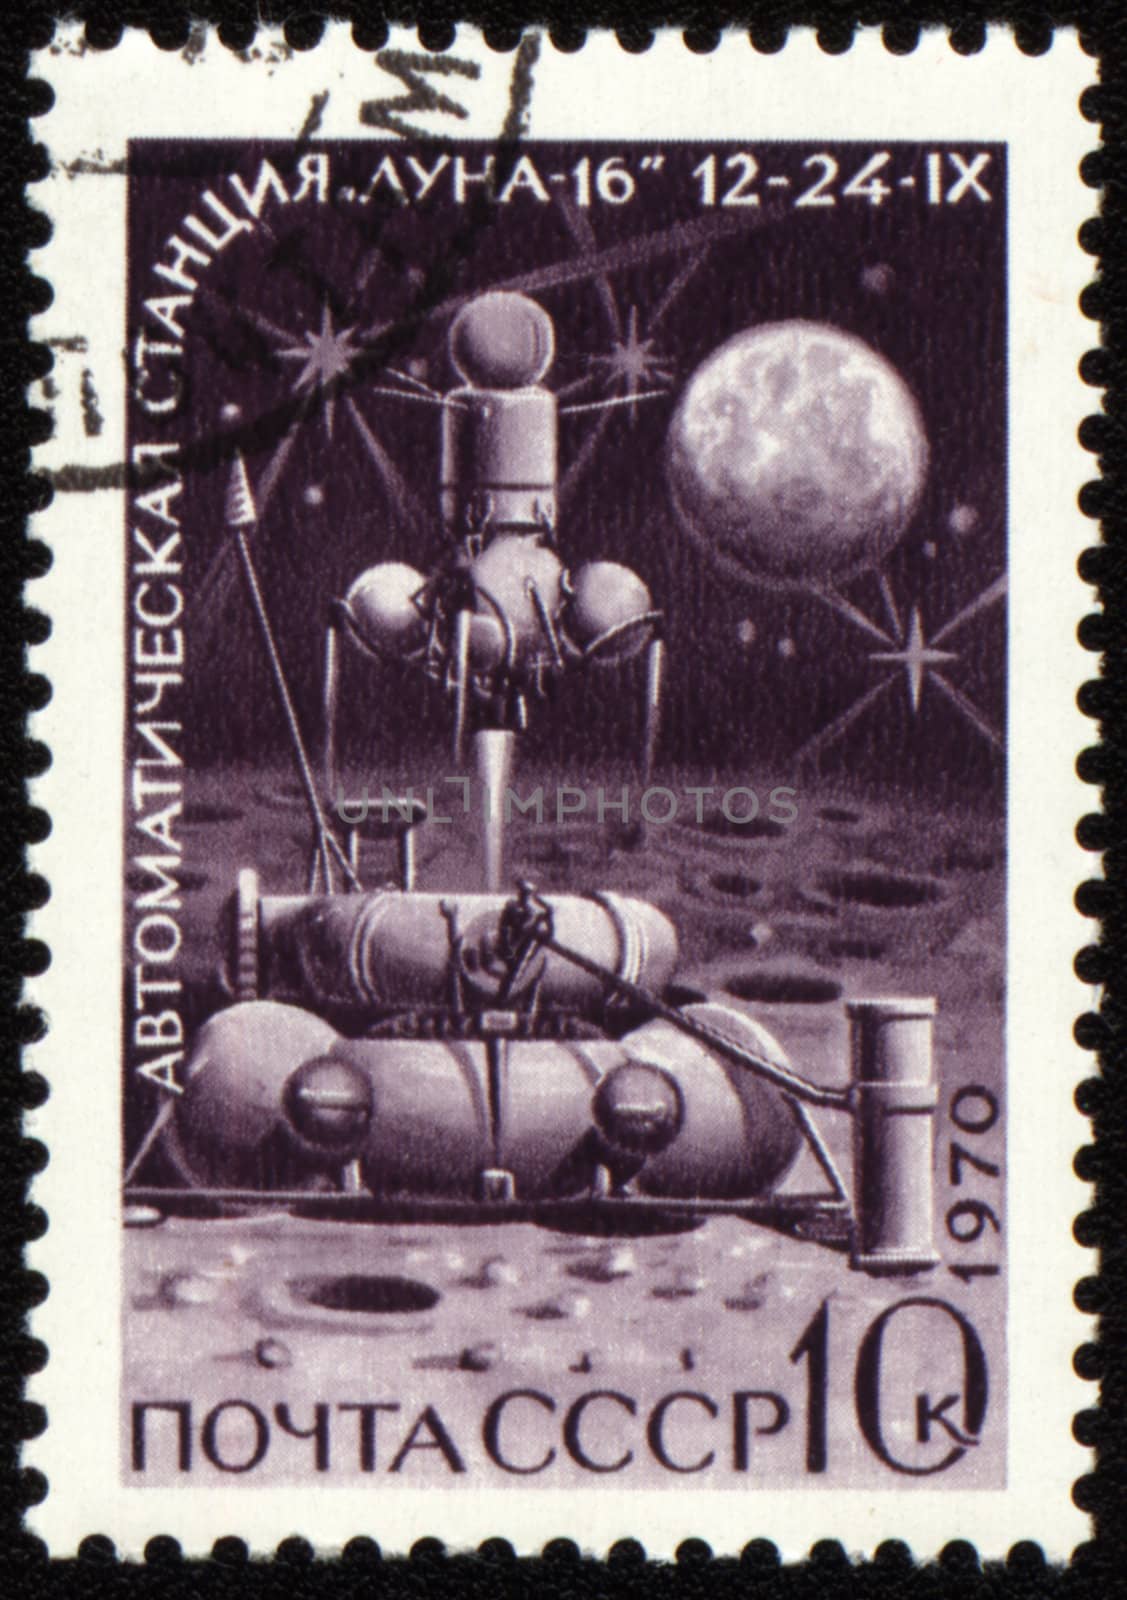 Postage stamp with soviet automatic station Luna-16 by wander